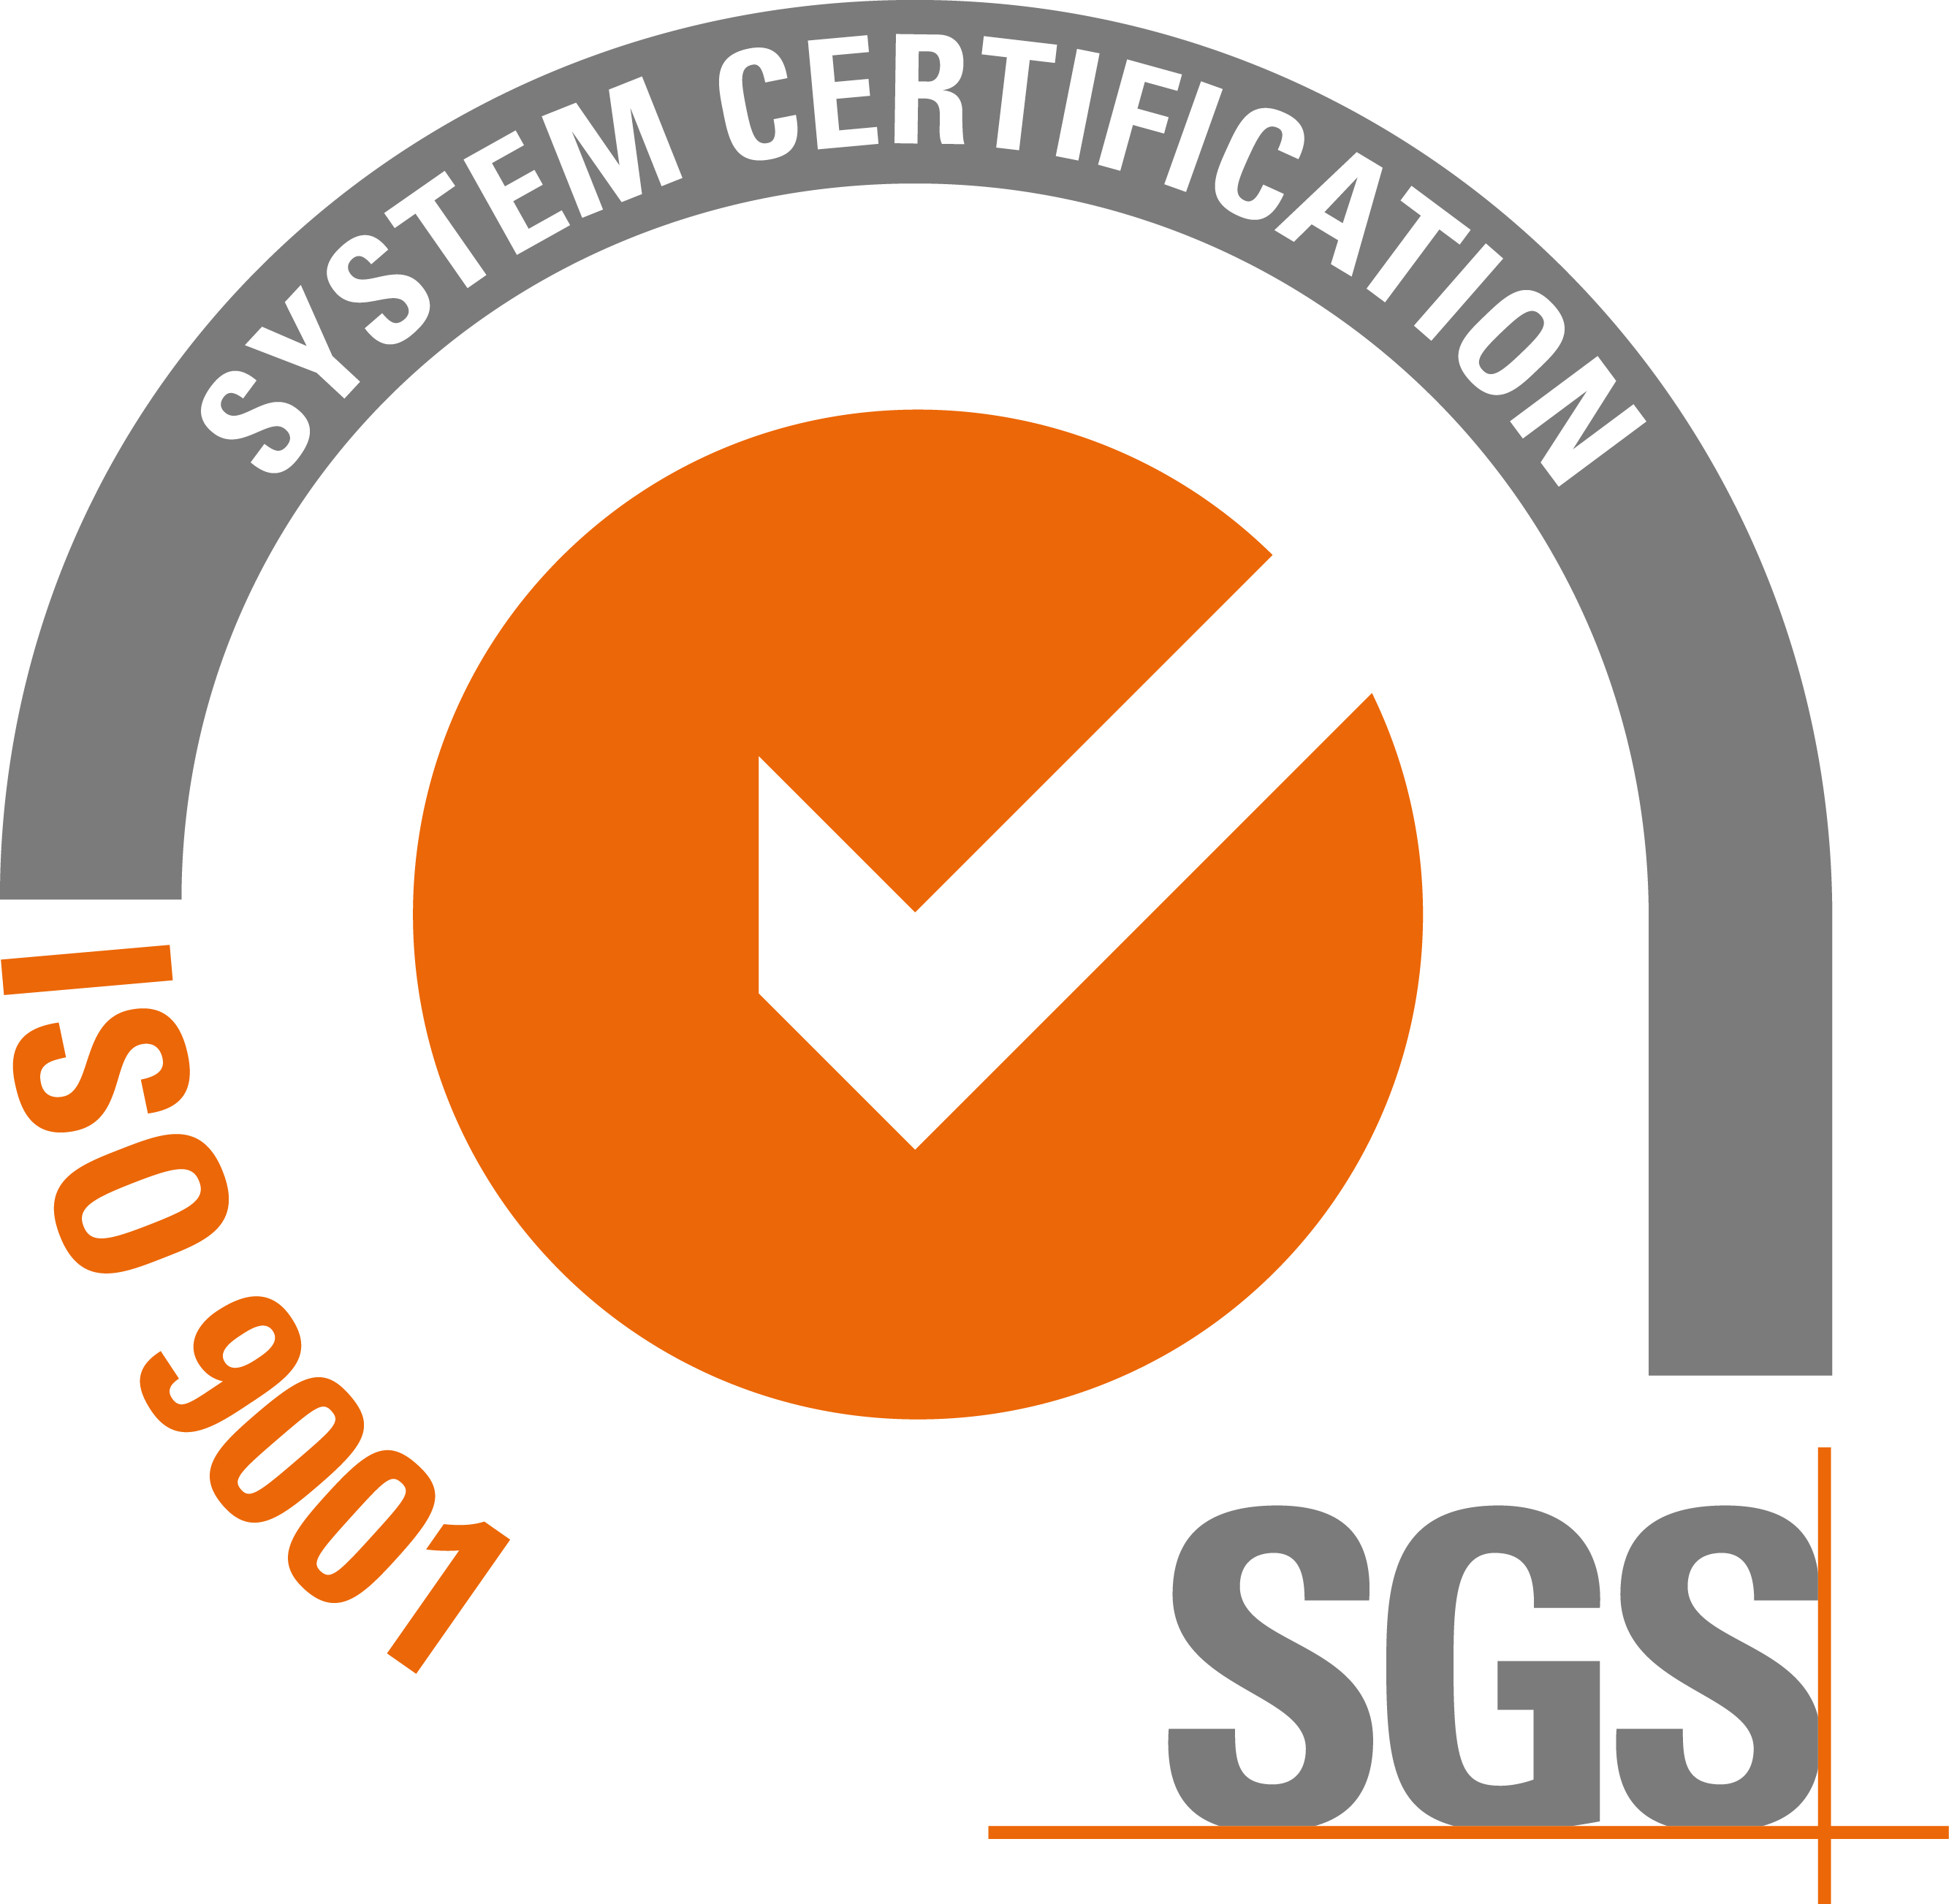 ISO 9001 SGS